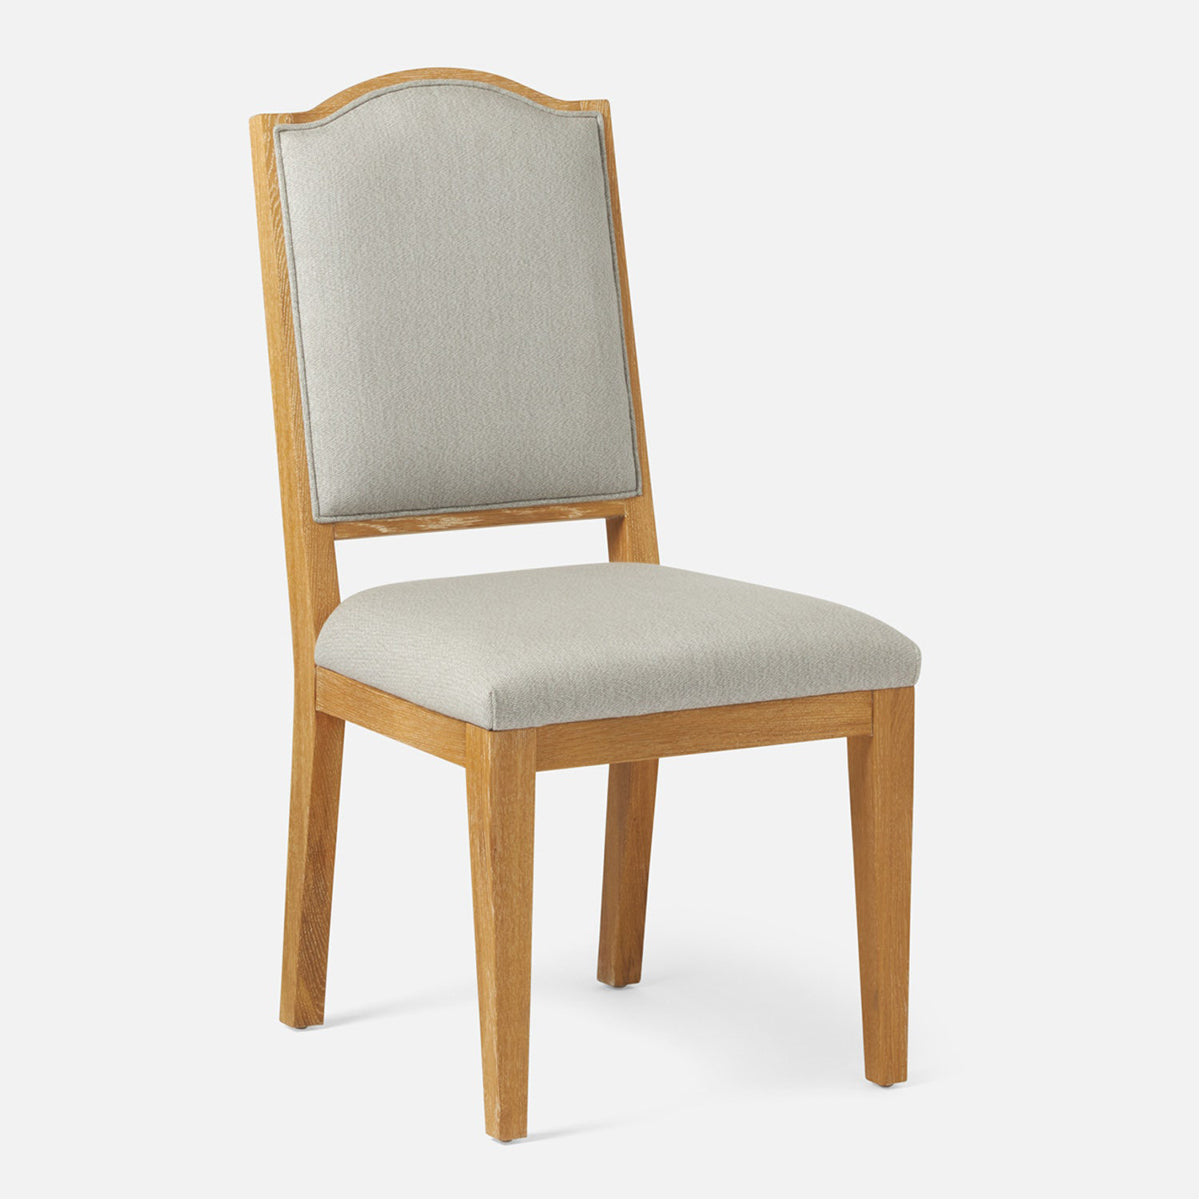 Made Goods Salem Upholstered Dining Chair in Humboldt Cotton Jute